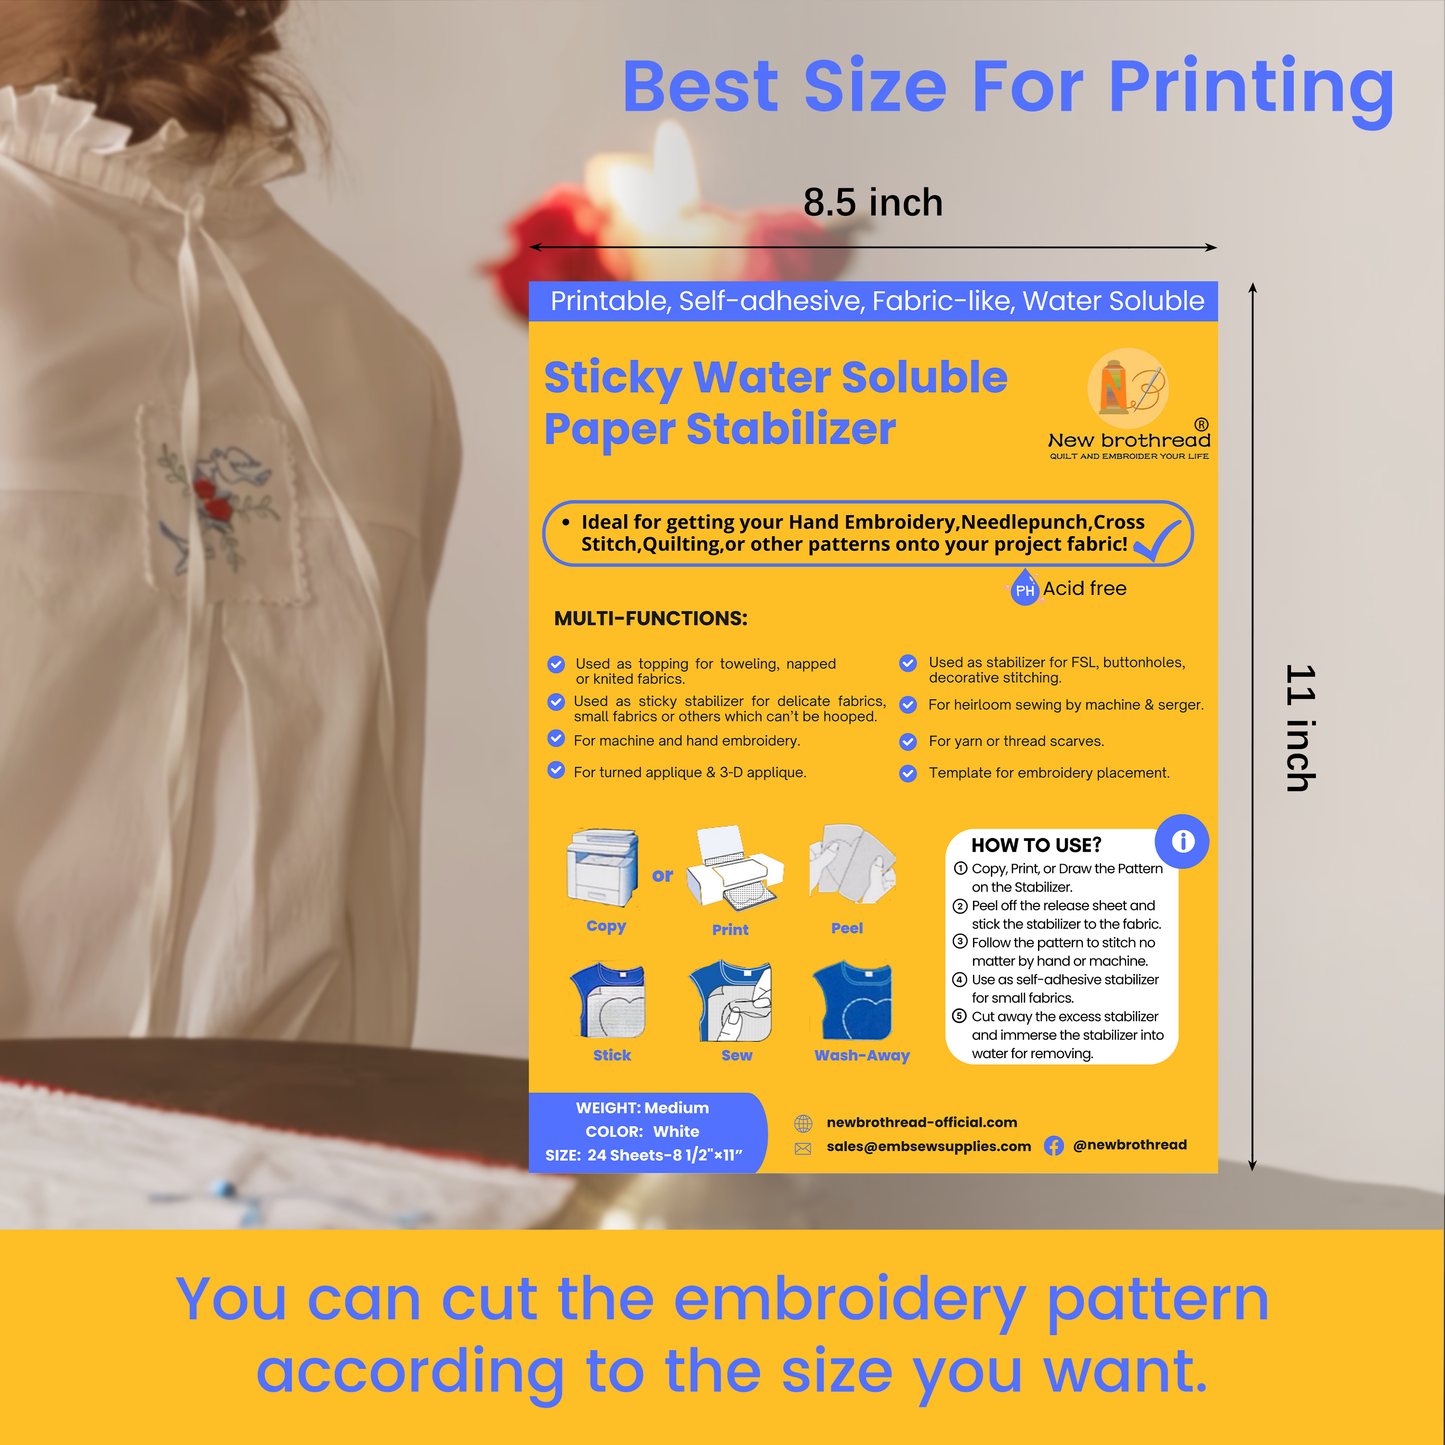 New brothread 24PCS 8.5"x11" Sticky Water Soluble Embroidery Stabilizer Printable Paper Stabilizer - Medium Weight - Allowed for Print or Draw Patterns Best for Hand & Machine Embroidery